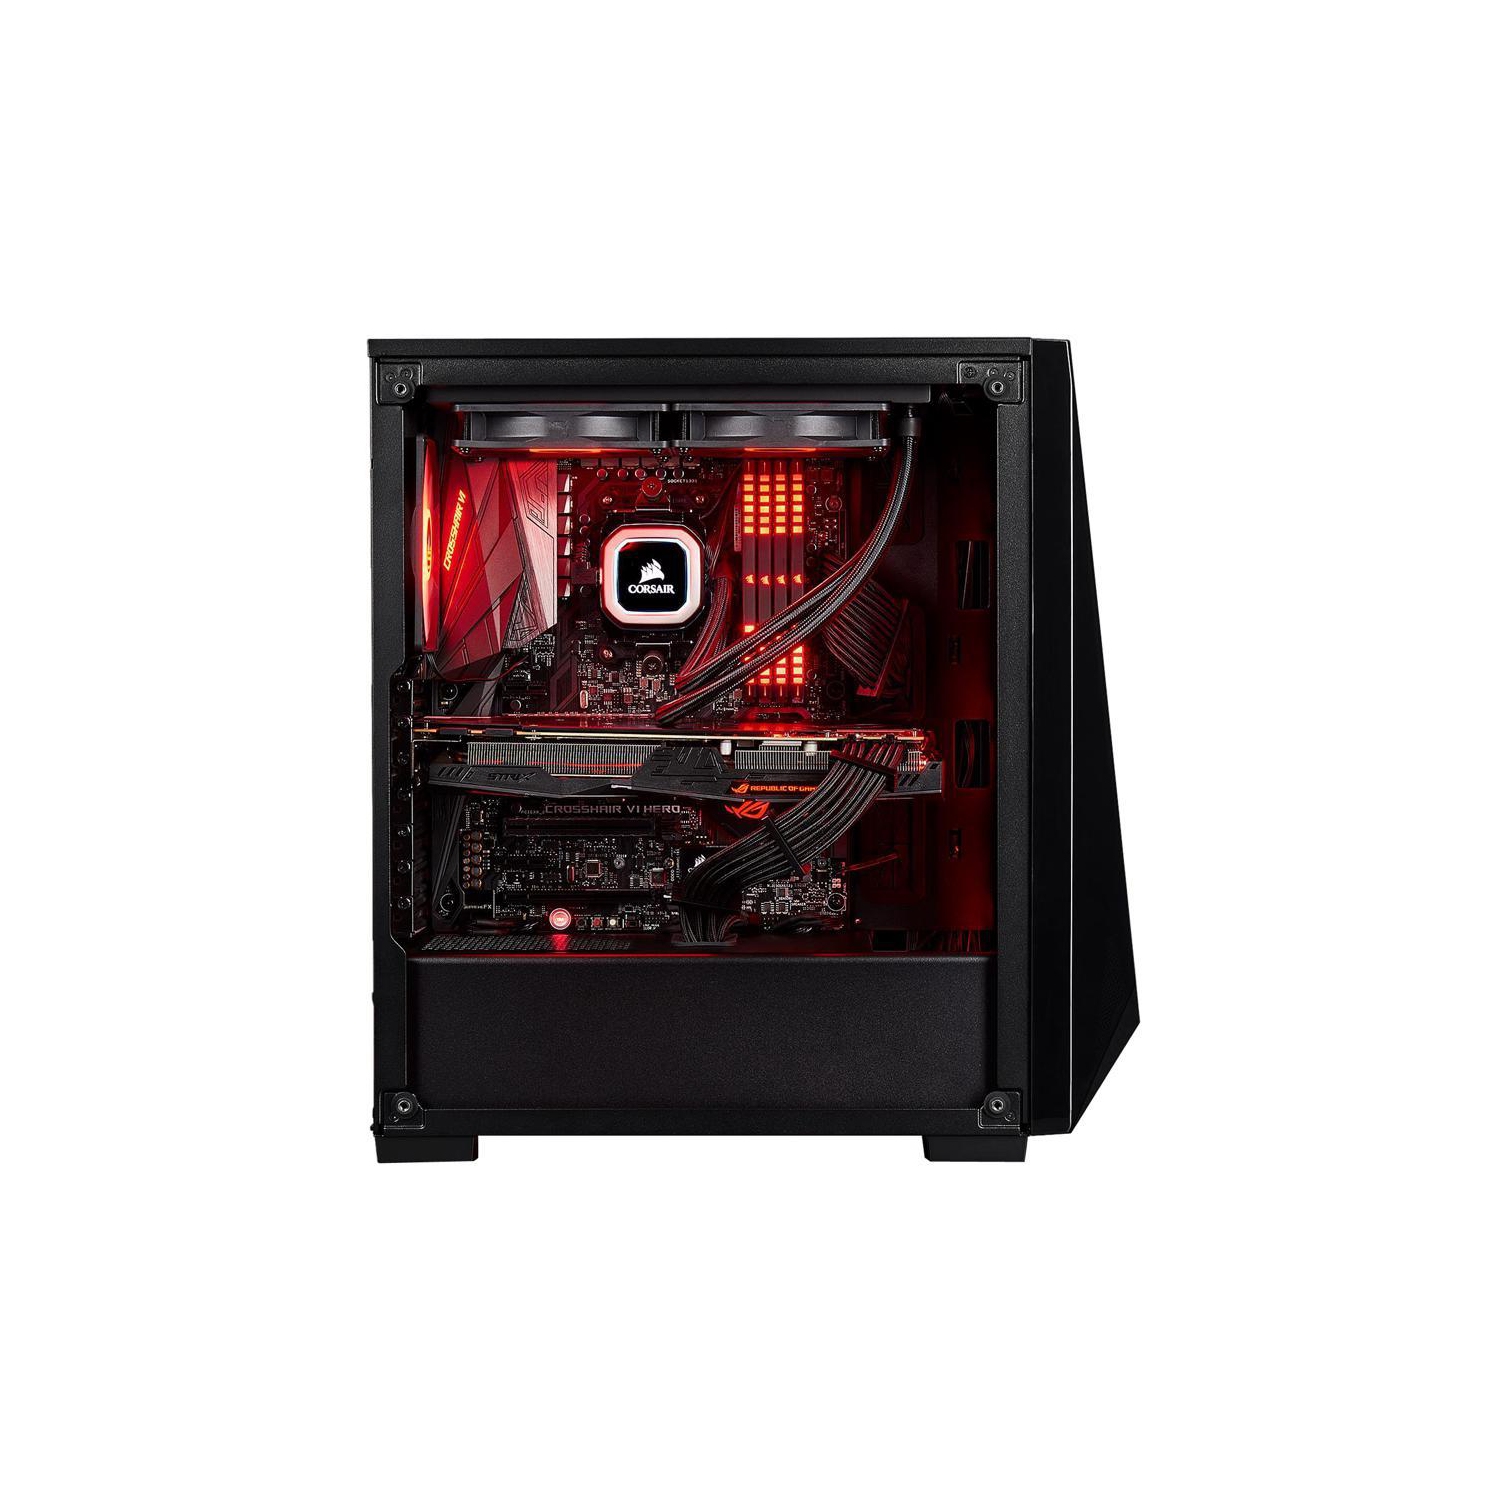 ZONIC Gaming PC | AMD Ryzen 5 5600G Processor 3.9GHz| 16 GB DDR4 RAM | 1TB M.2 SSD| GeForce RTX 3050 8GB GDDR6| Wi-Fi built-in | Windows 11. Gaming Keyboard Mouse and Headset Kit